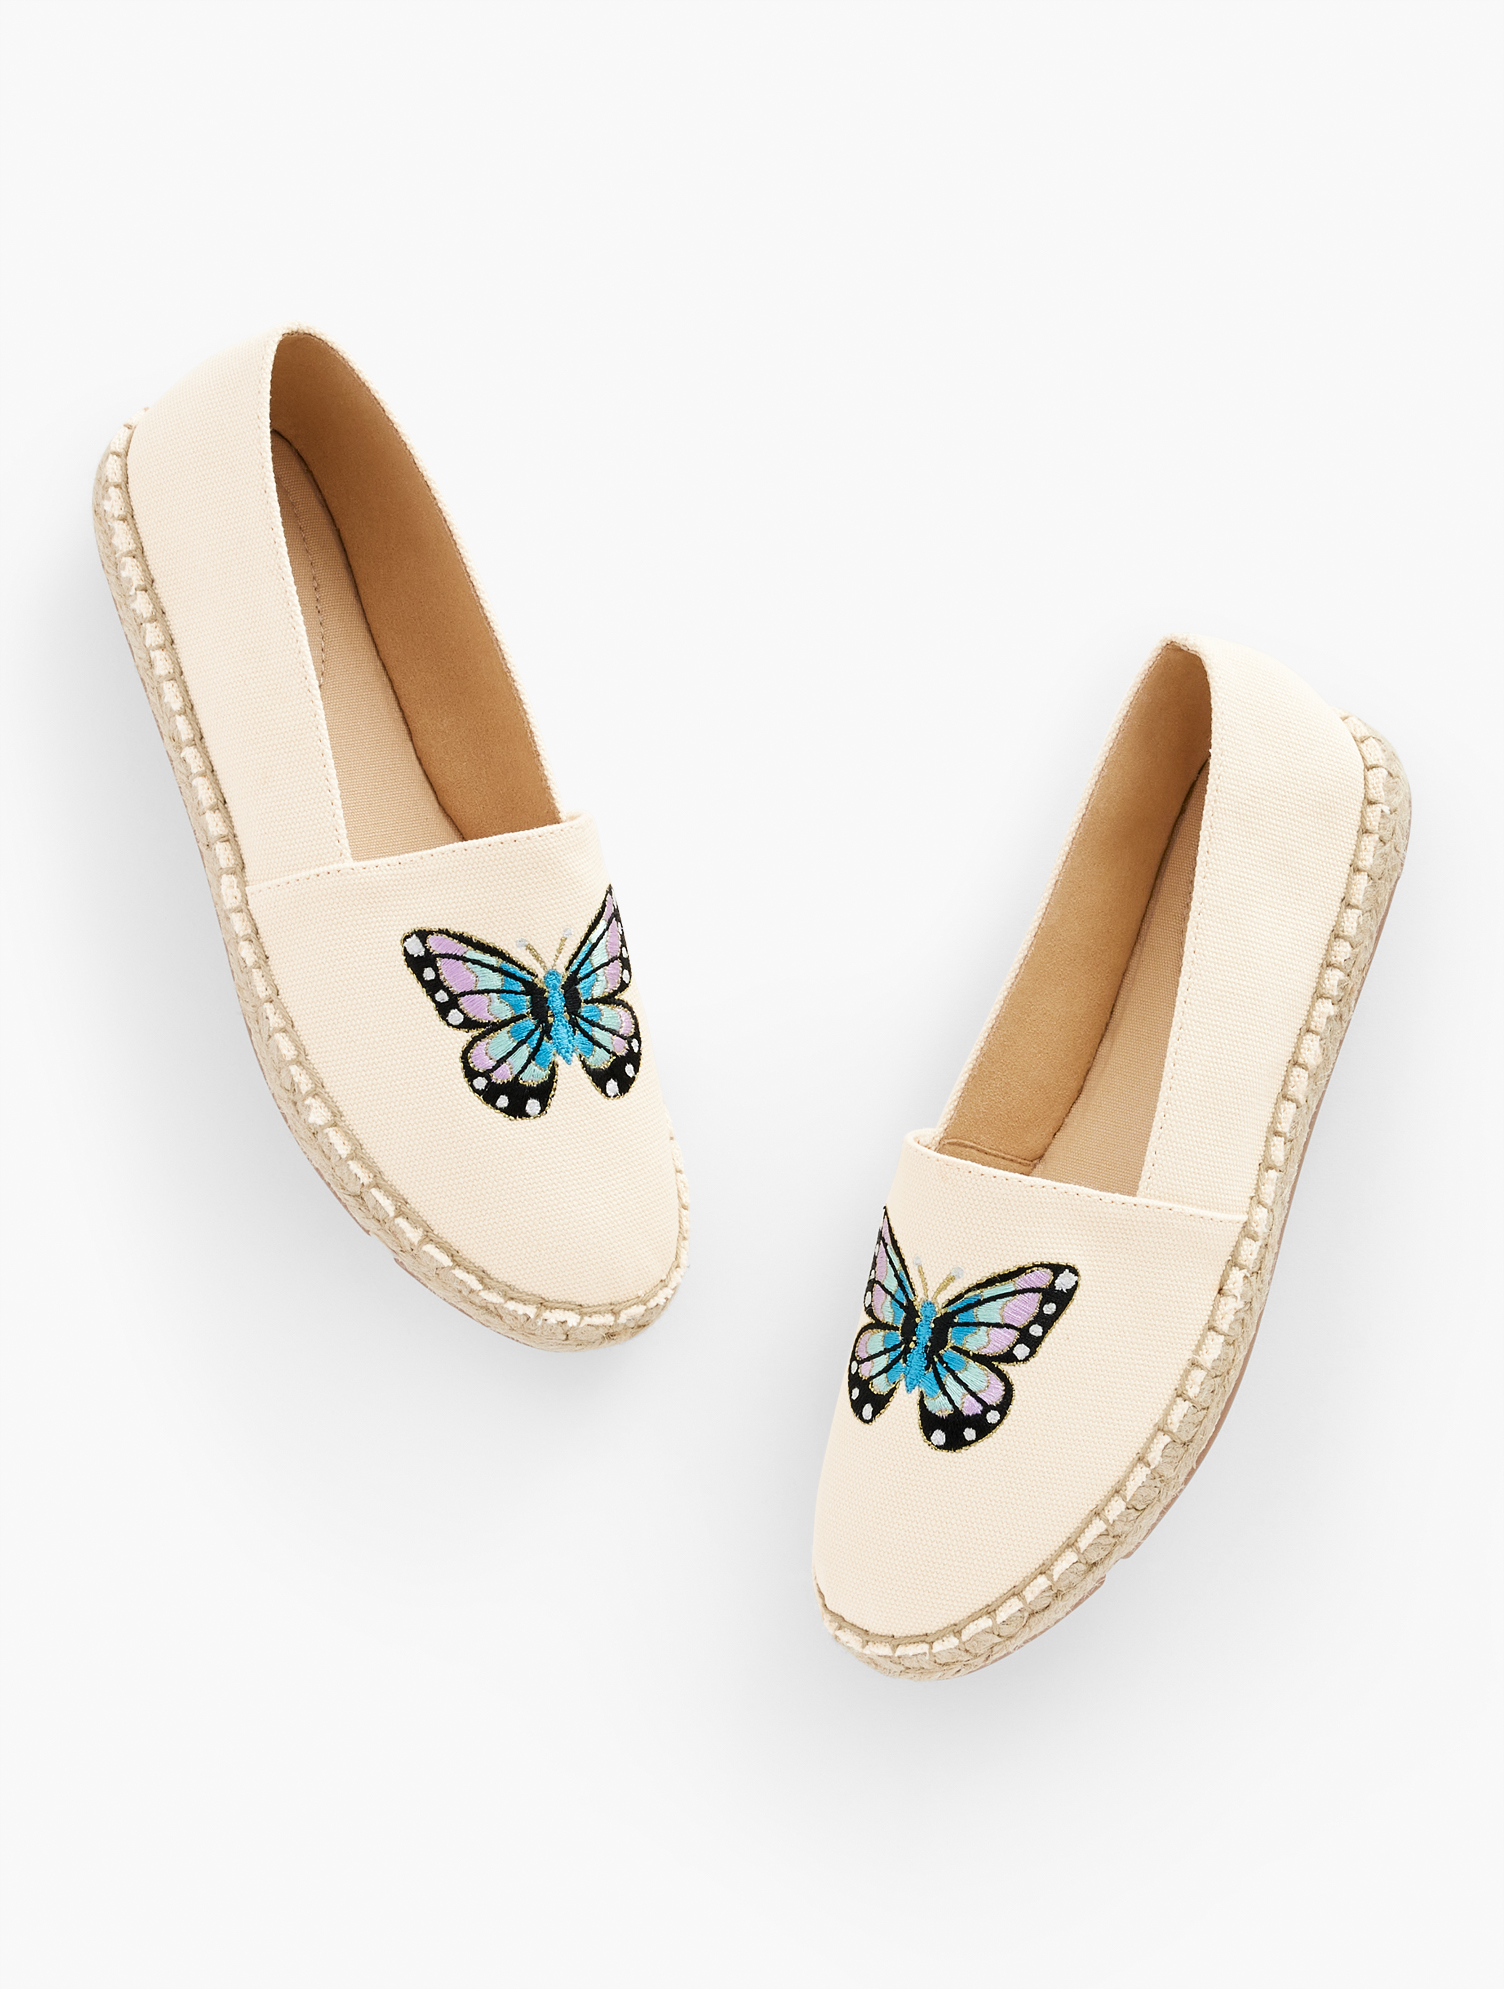 Talbots Izzy Embroidered Canvas Espadrilles - Butterfly - Natural - 7m - 100% Cotton